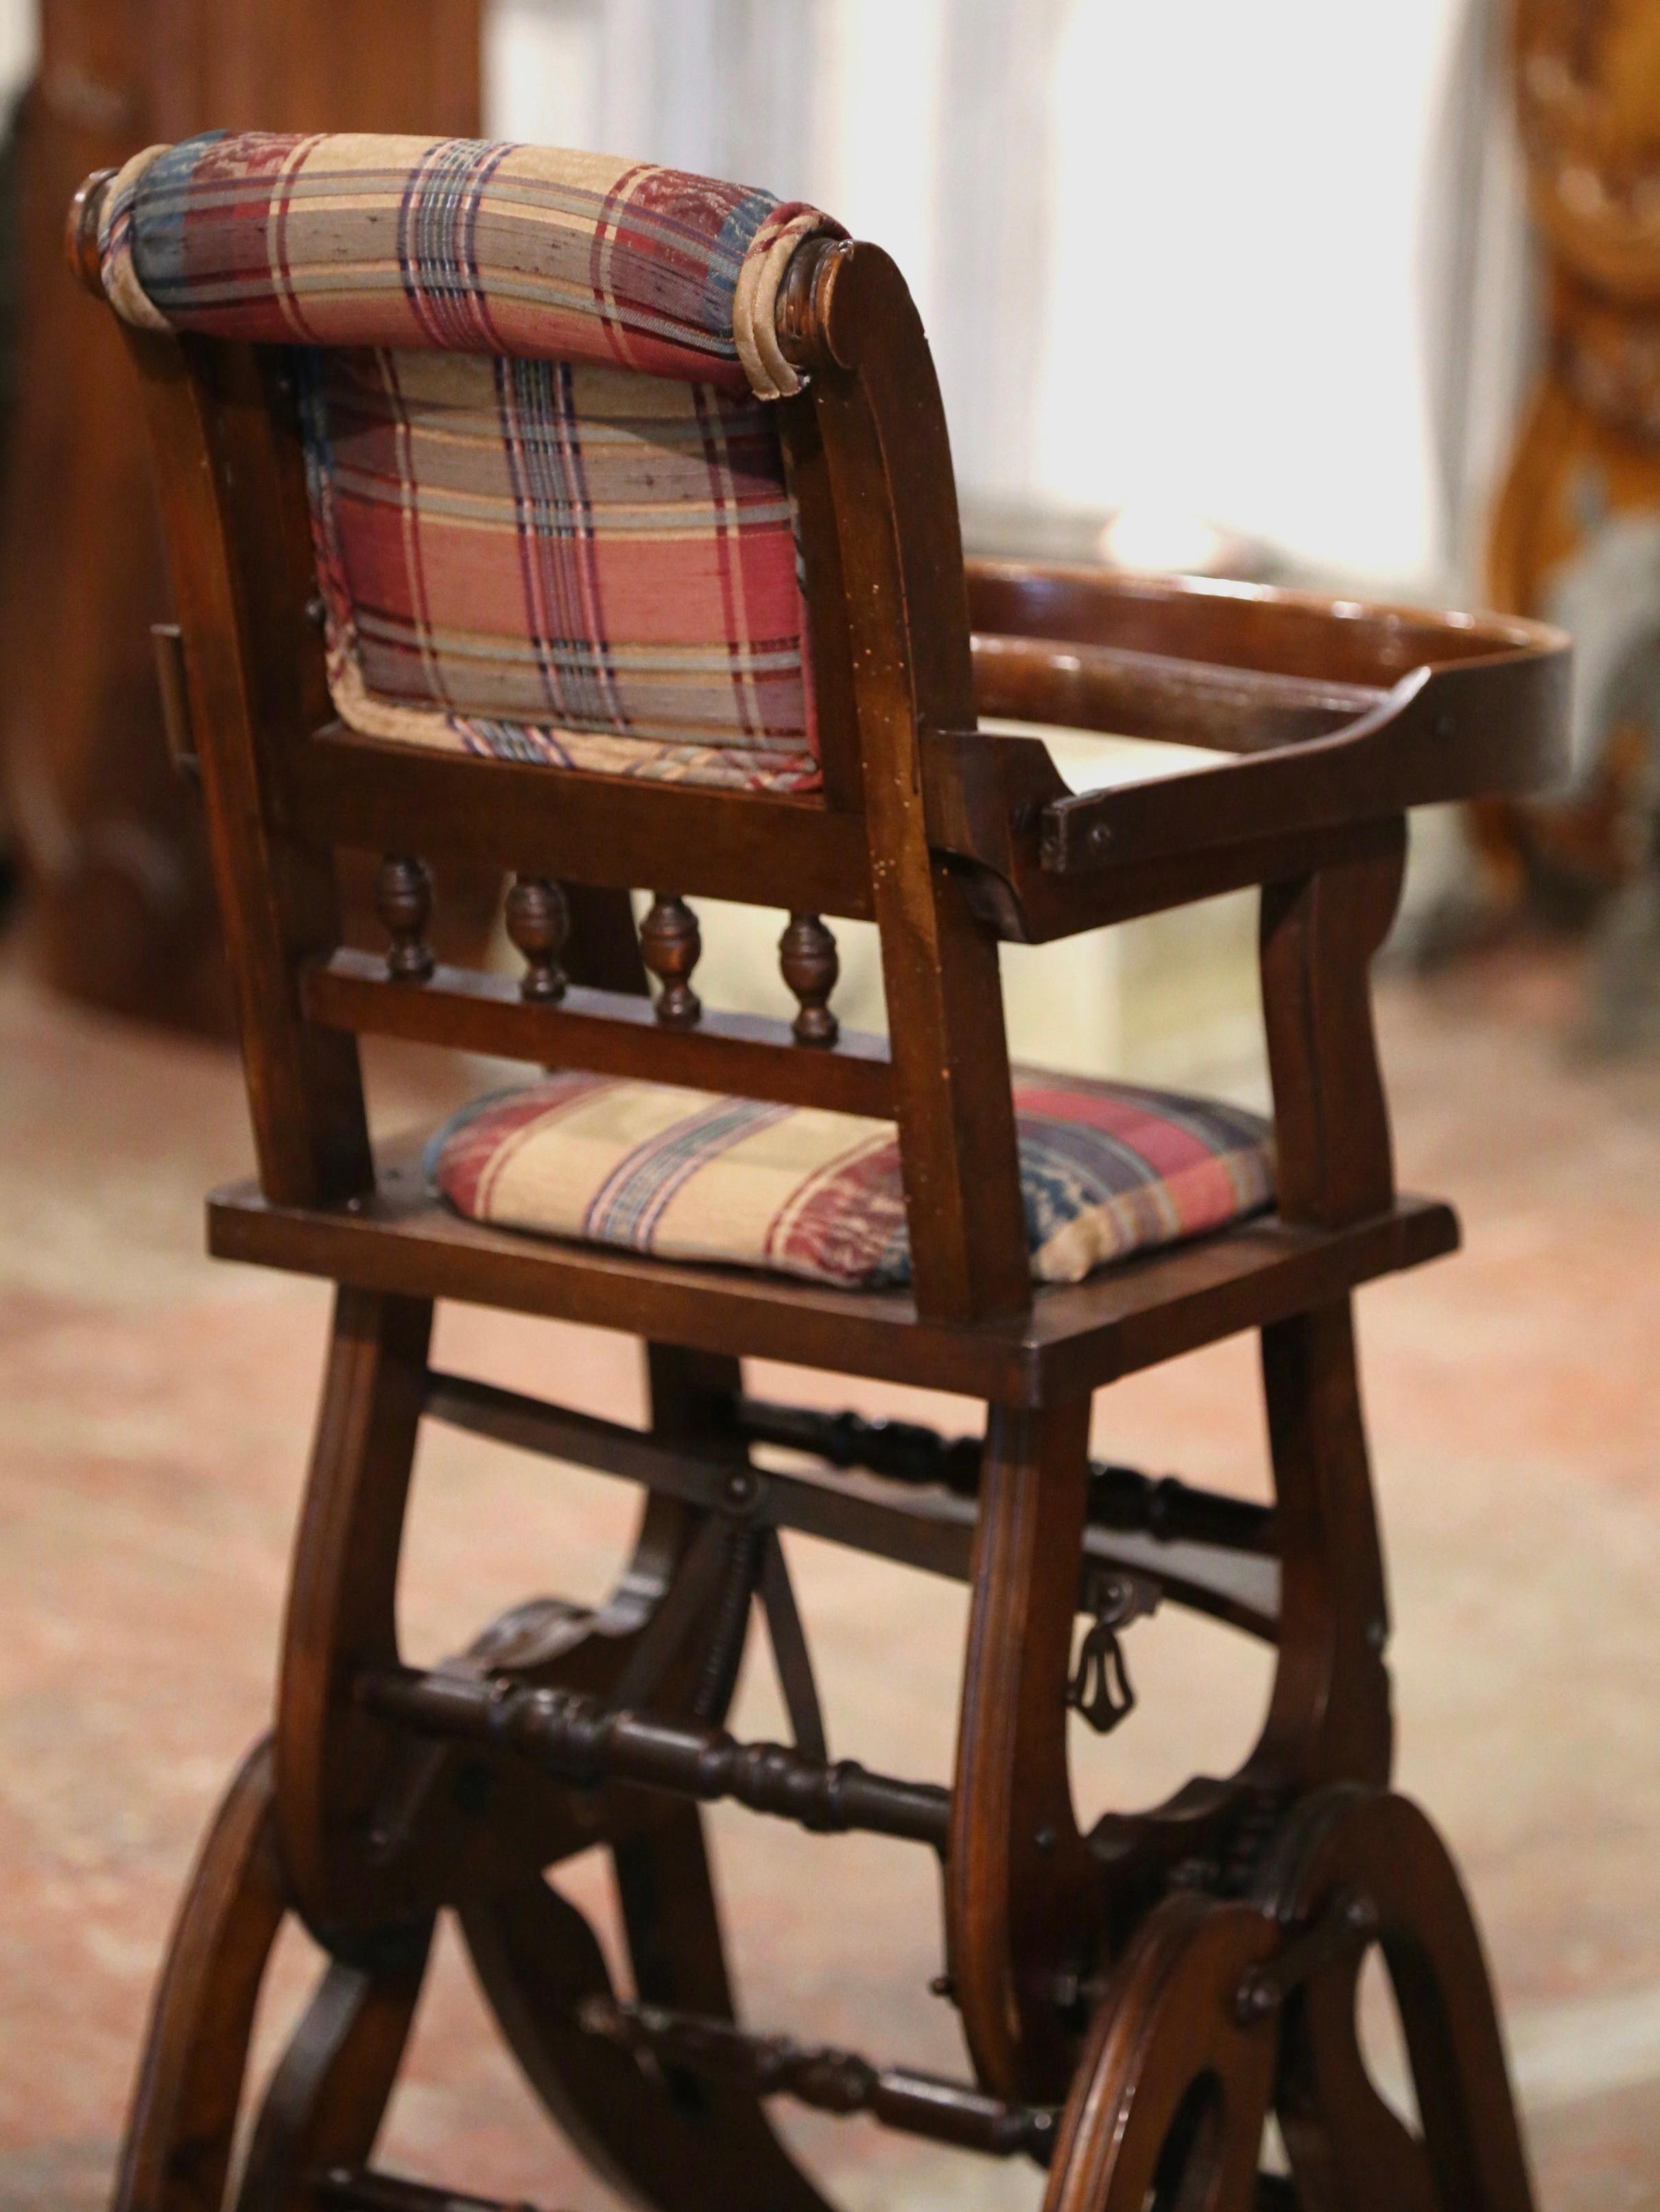 19th Century English Carved Walnut and Fabric Convertible High Chair to Rocker For Sale 3